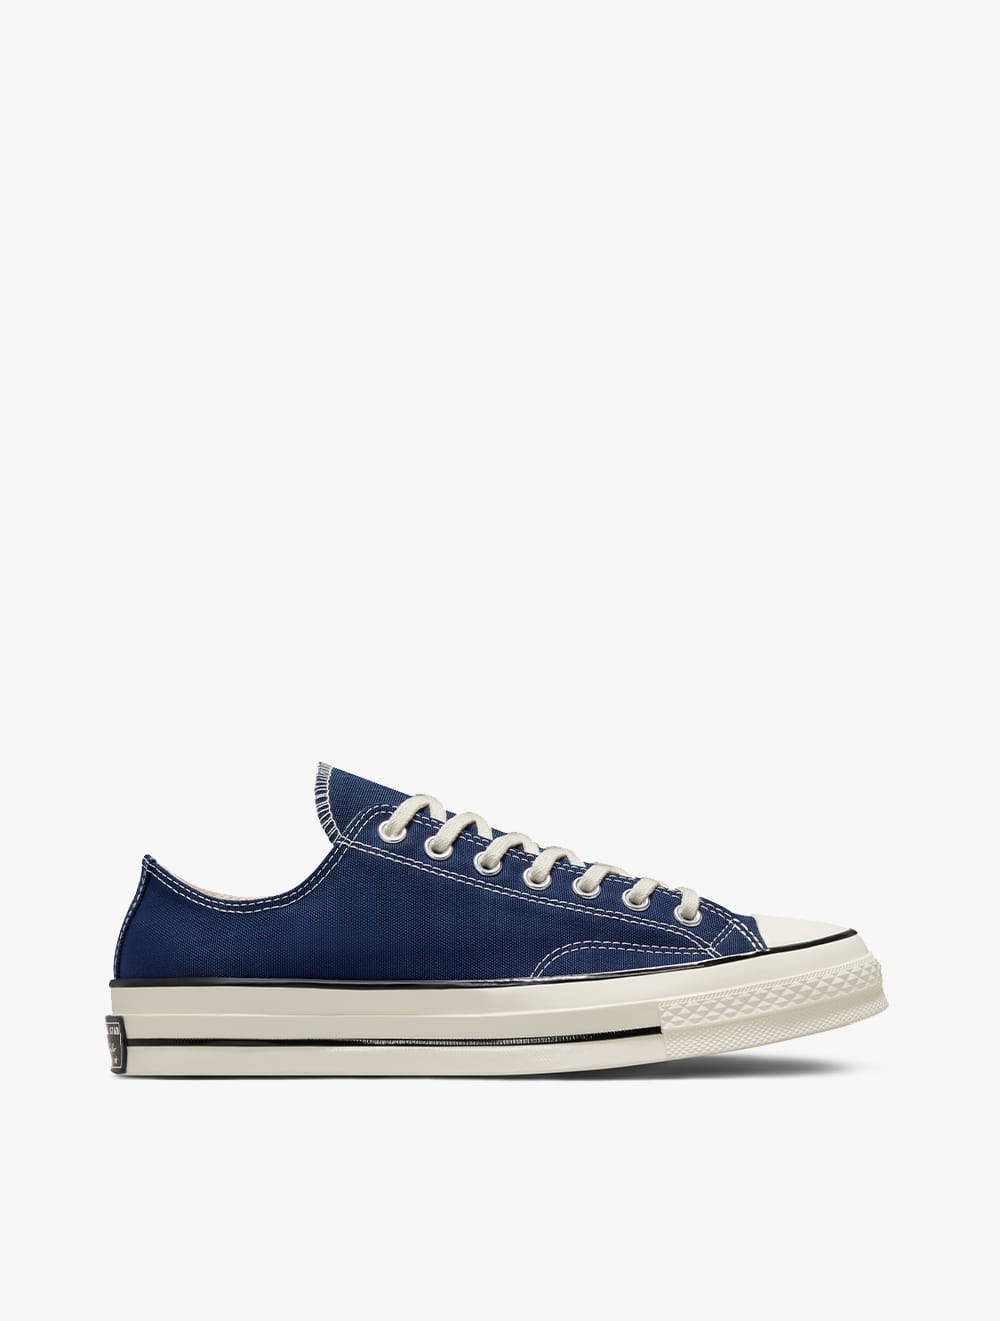 CONVERSE MEN'S CHUCK 70 RECYCLED RPET CANVAS SNEAKERS - MIDNIGHT  NAVY/EGRET/BLACK - MixASale